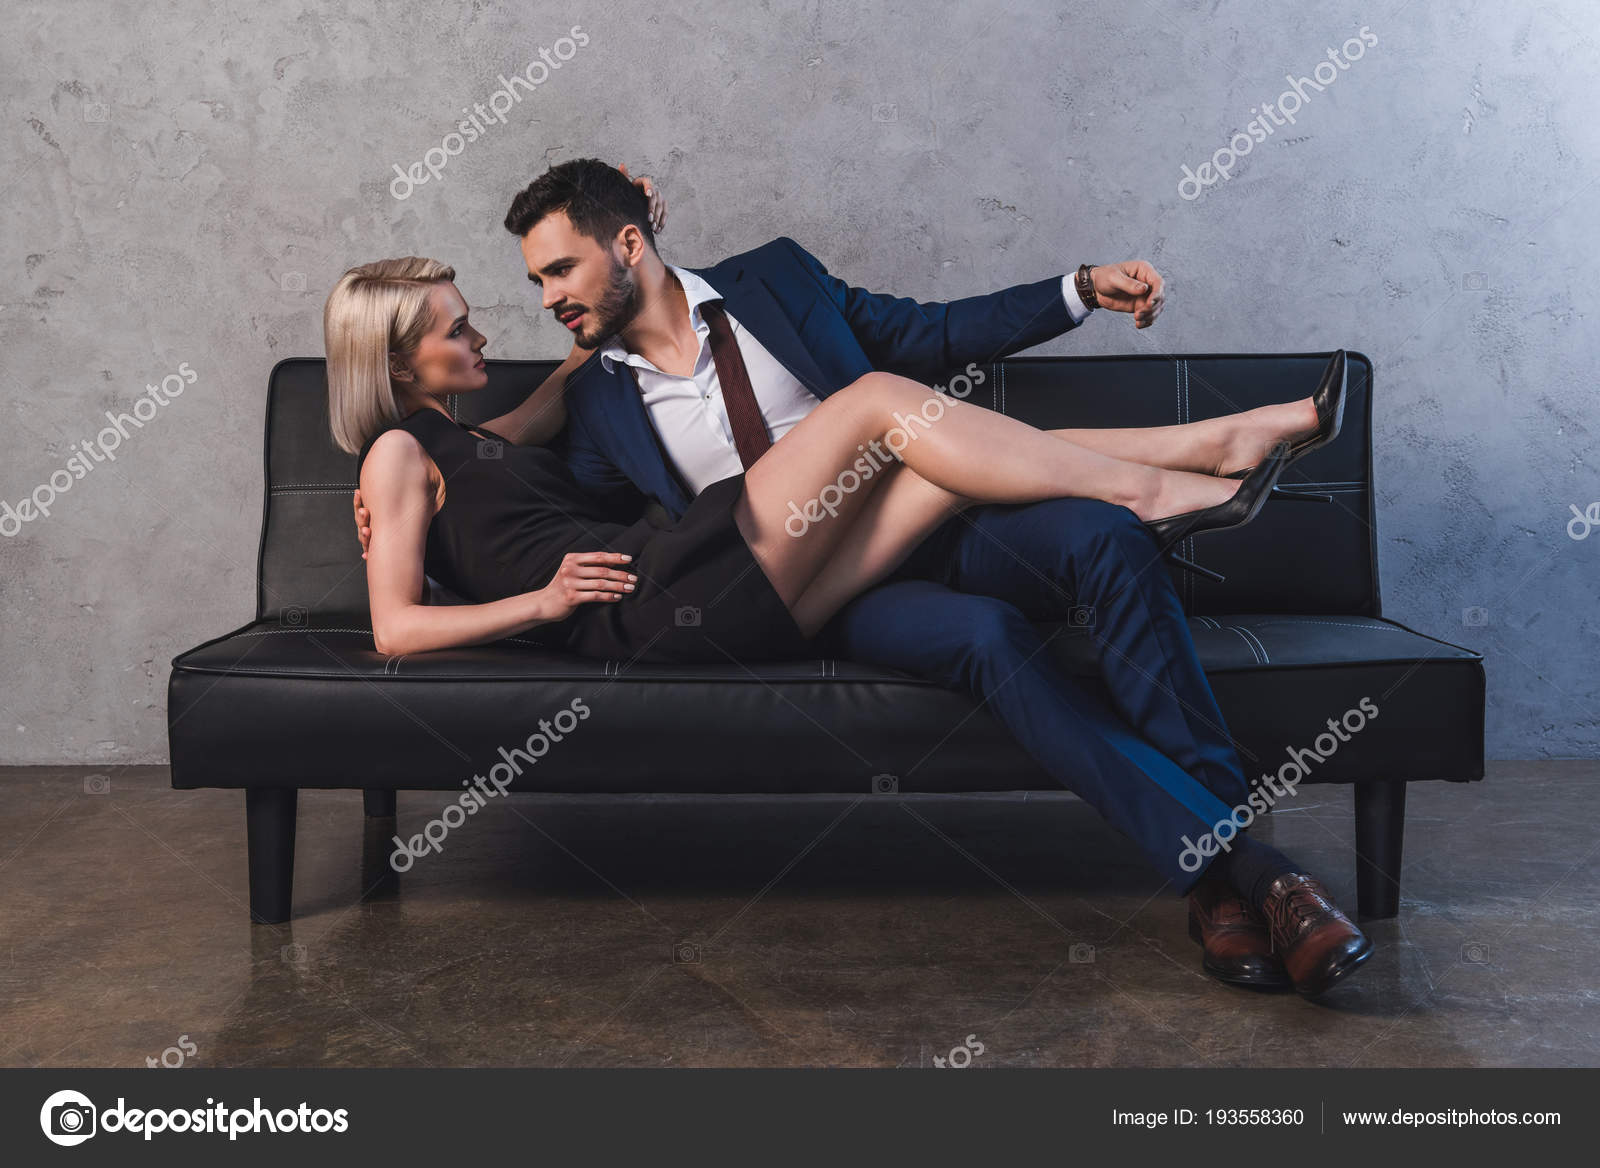 Foreplay on the couch